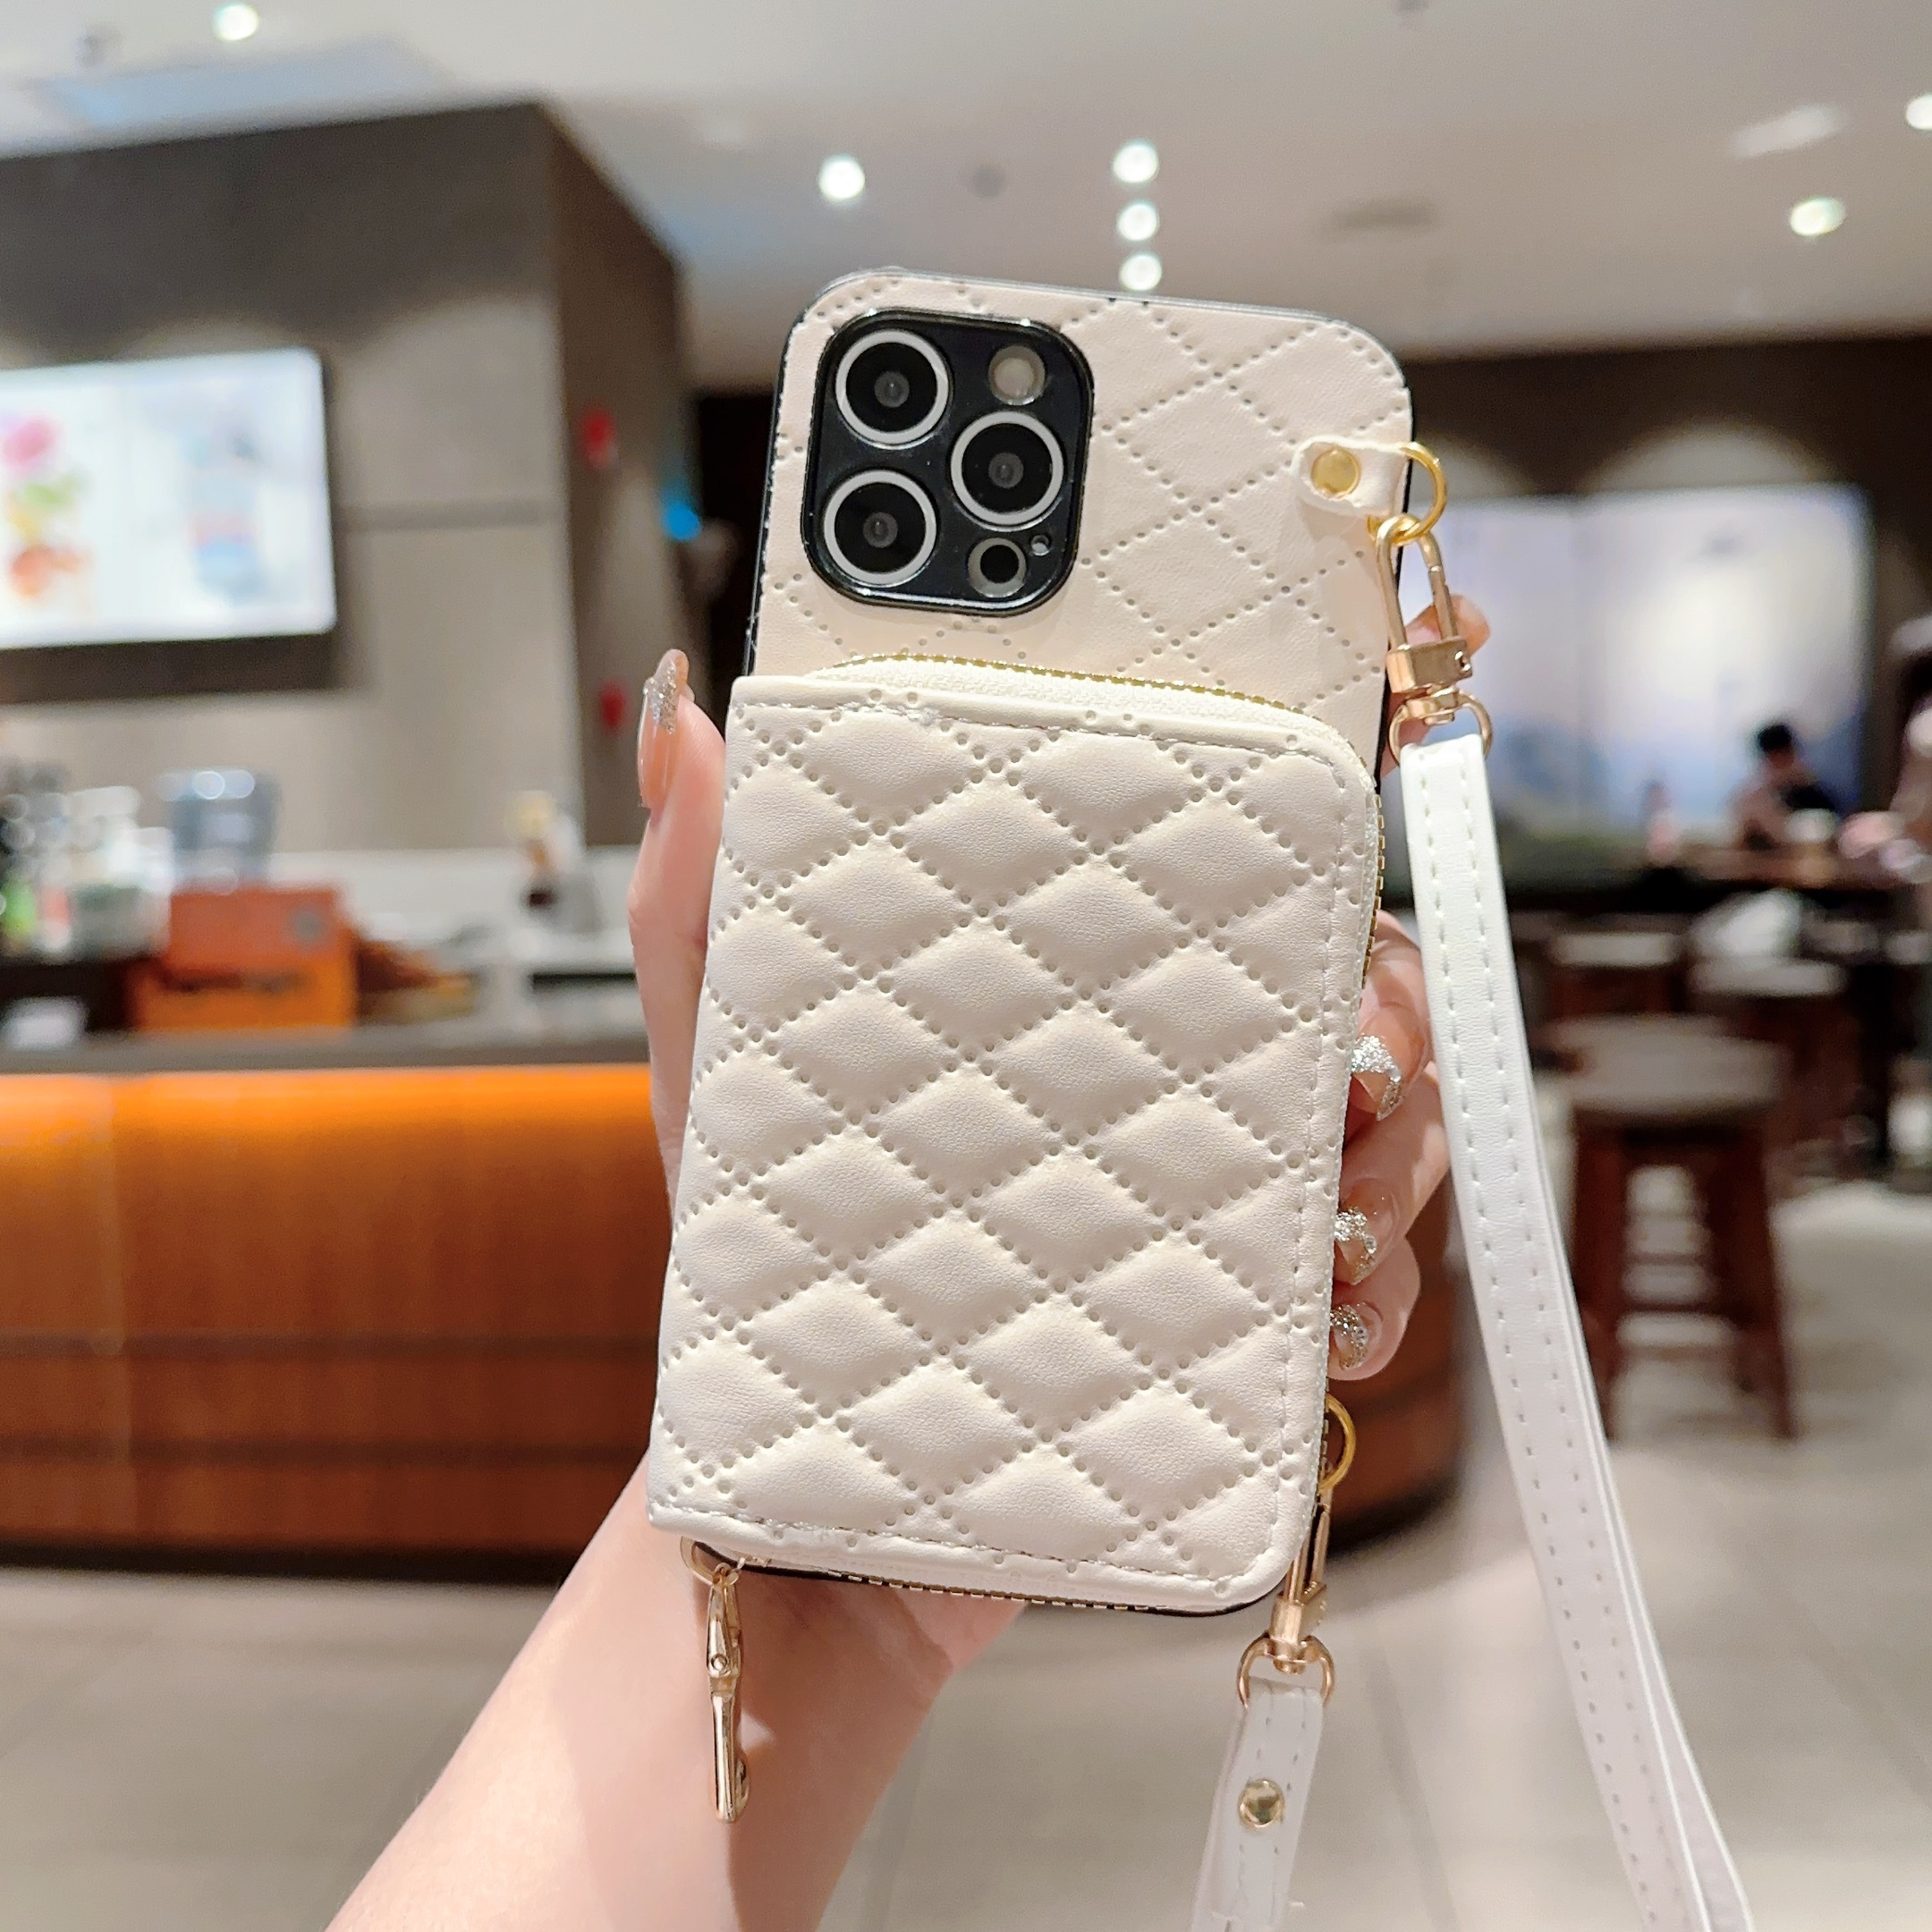 Gucci Bee Case for iPhone 11,12,13,14,15 iPhone 11,12,13,14,15 Pro iPhone 11,12,13,14,15  Pro Max , iPhone Xs Max ,XR, X iPhone 6,7,8 plus